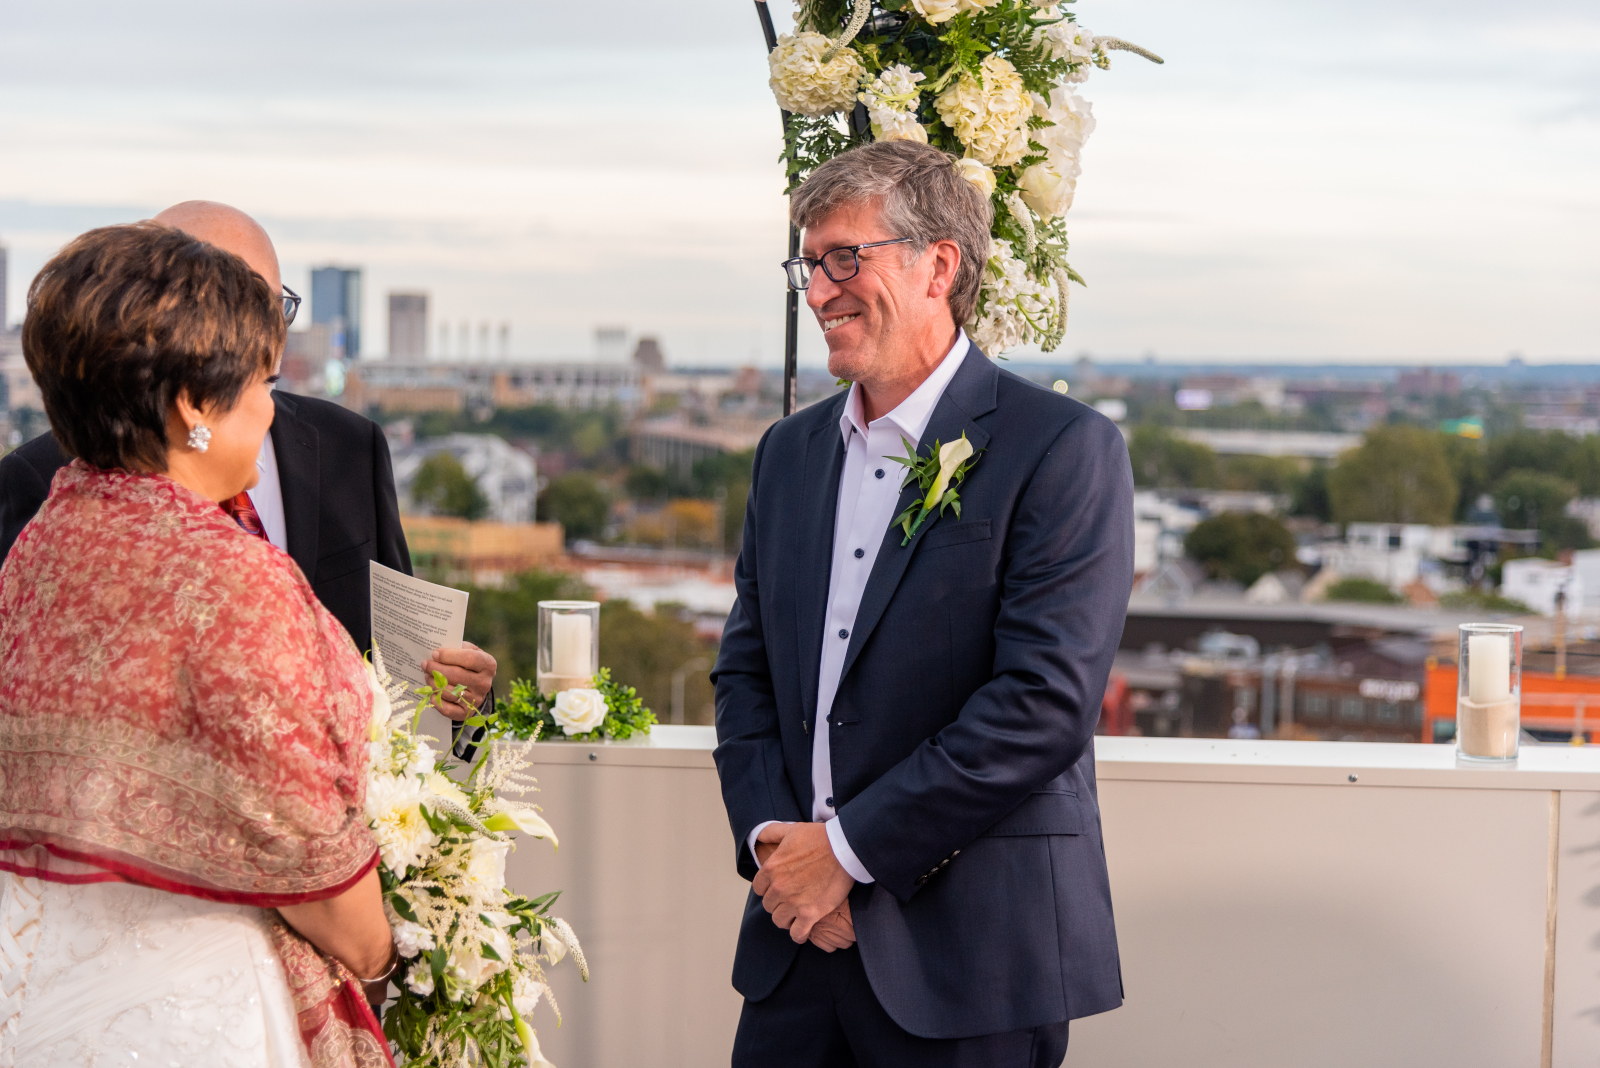 Bride and groom wedding ceremony, smile, cute, sweet, older groom, older couple, romantic outdoor urban wedding ceremony at Penthouse Events, Ohio City, Cleveland Flats, downtown Cleveland skyline, Lake Erie